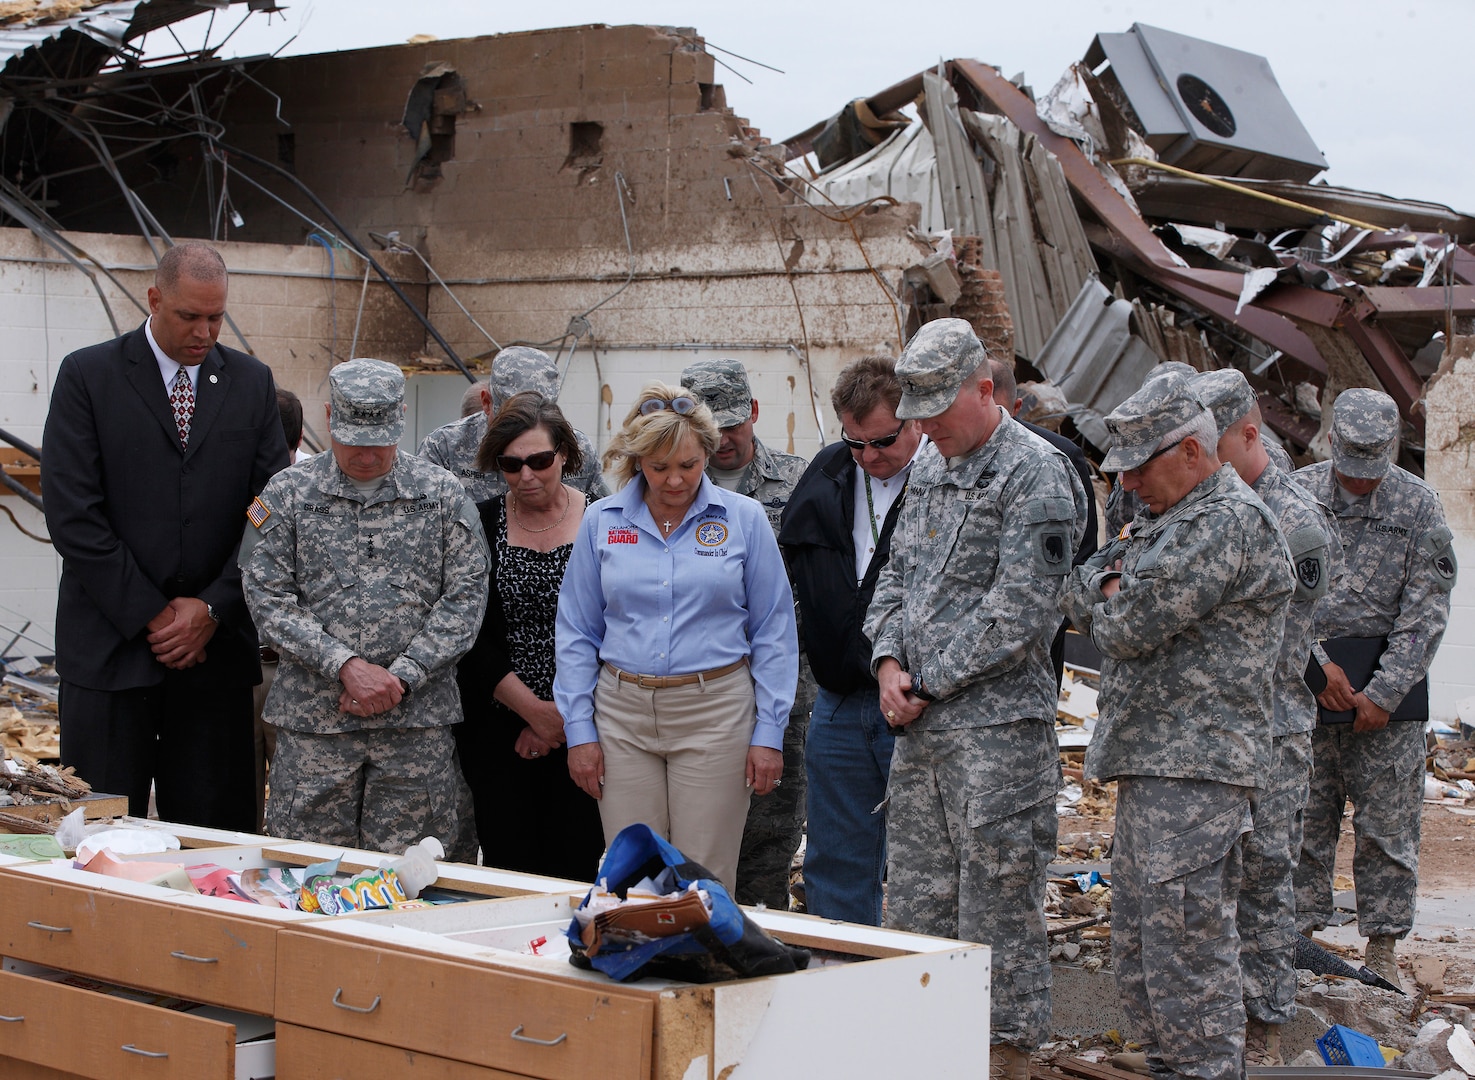 Among the National Guard responses in 2013 was the devastating tornado in Moore, Okla., on May 20. Mary Fallin, governor of Oklahoma, leads Gen. Frank J. Grass, chief, National Guard Bureau, through the Plaza Towers Elementary School in Moore, Okla., where seven students were killed.